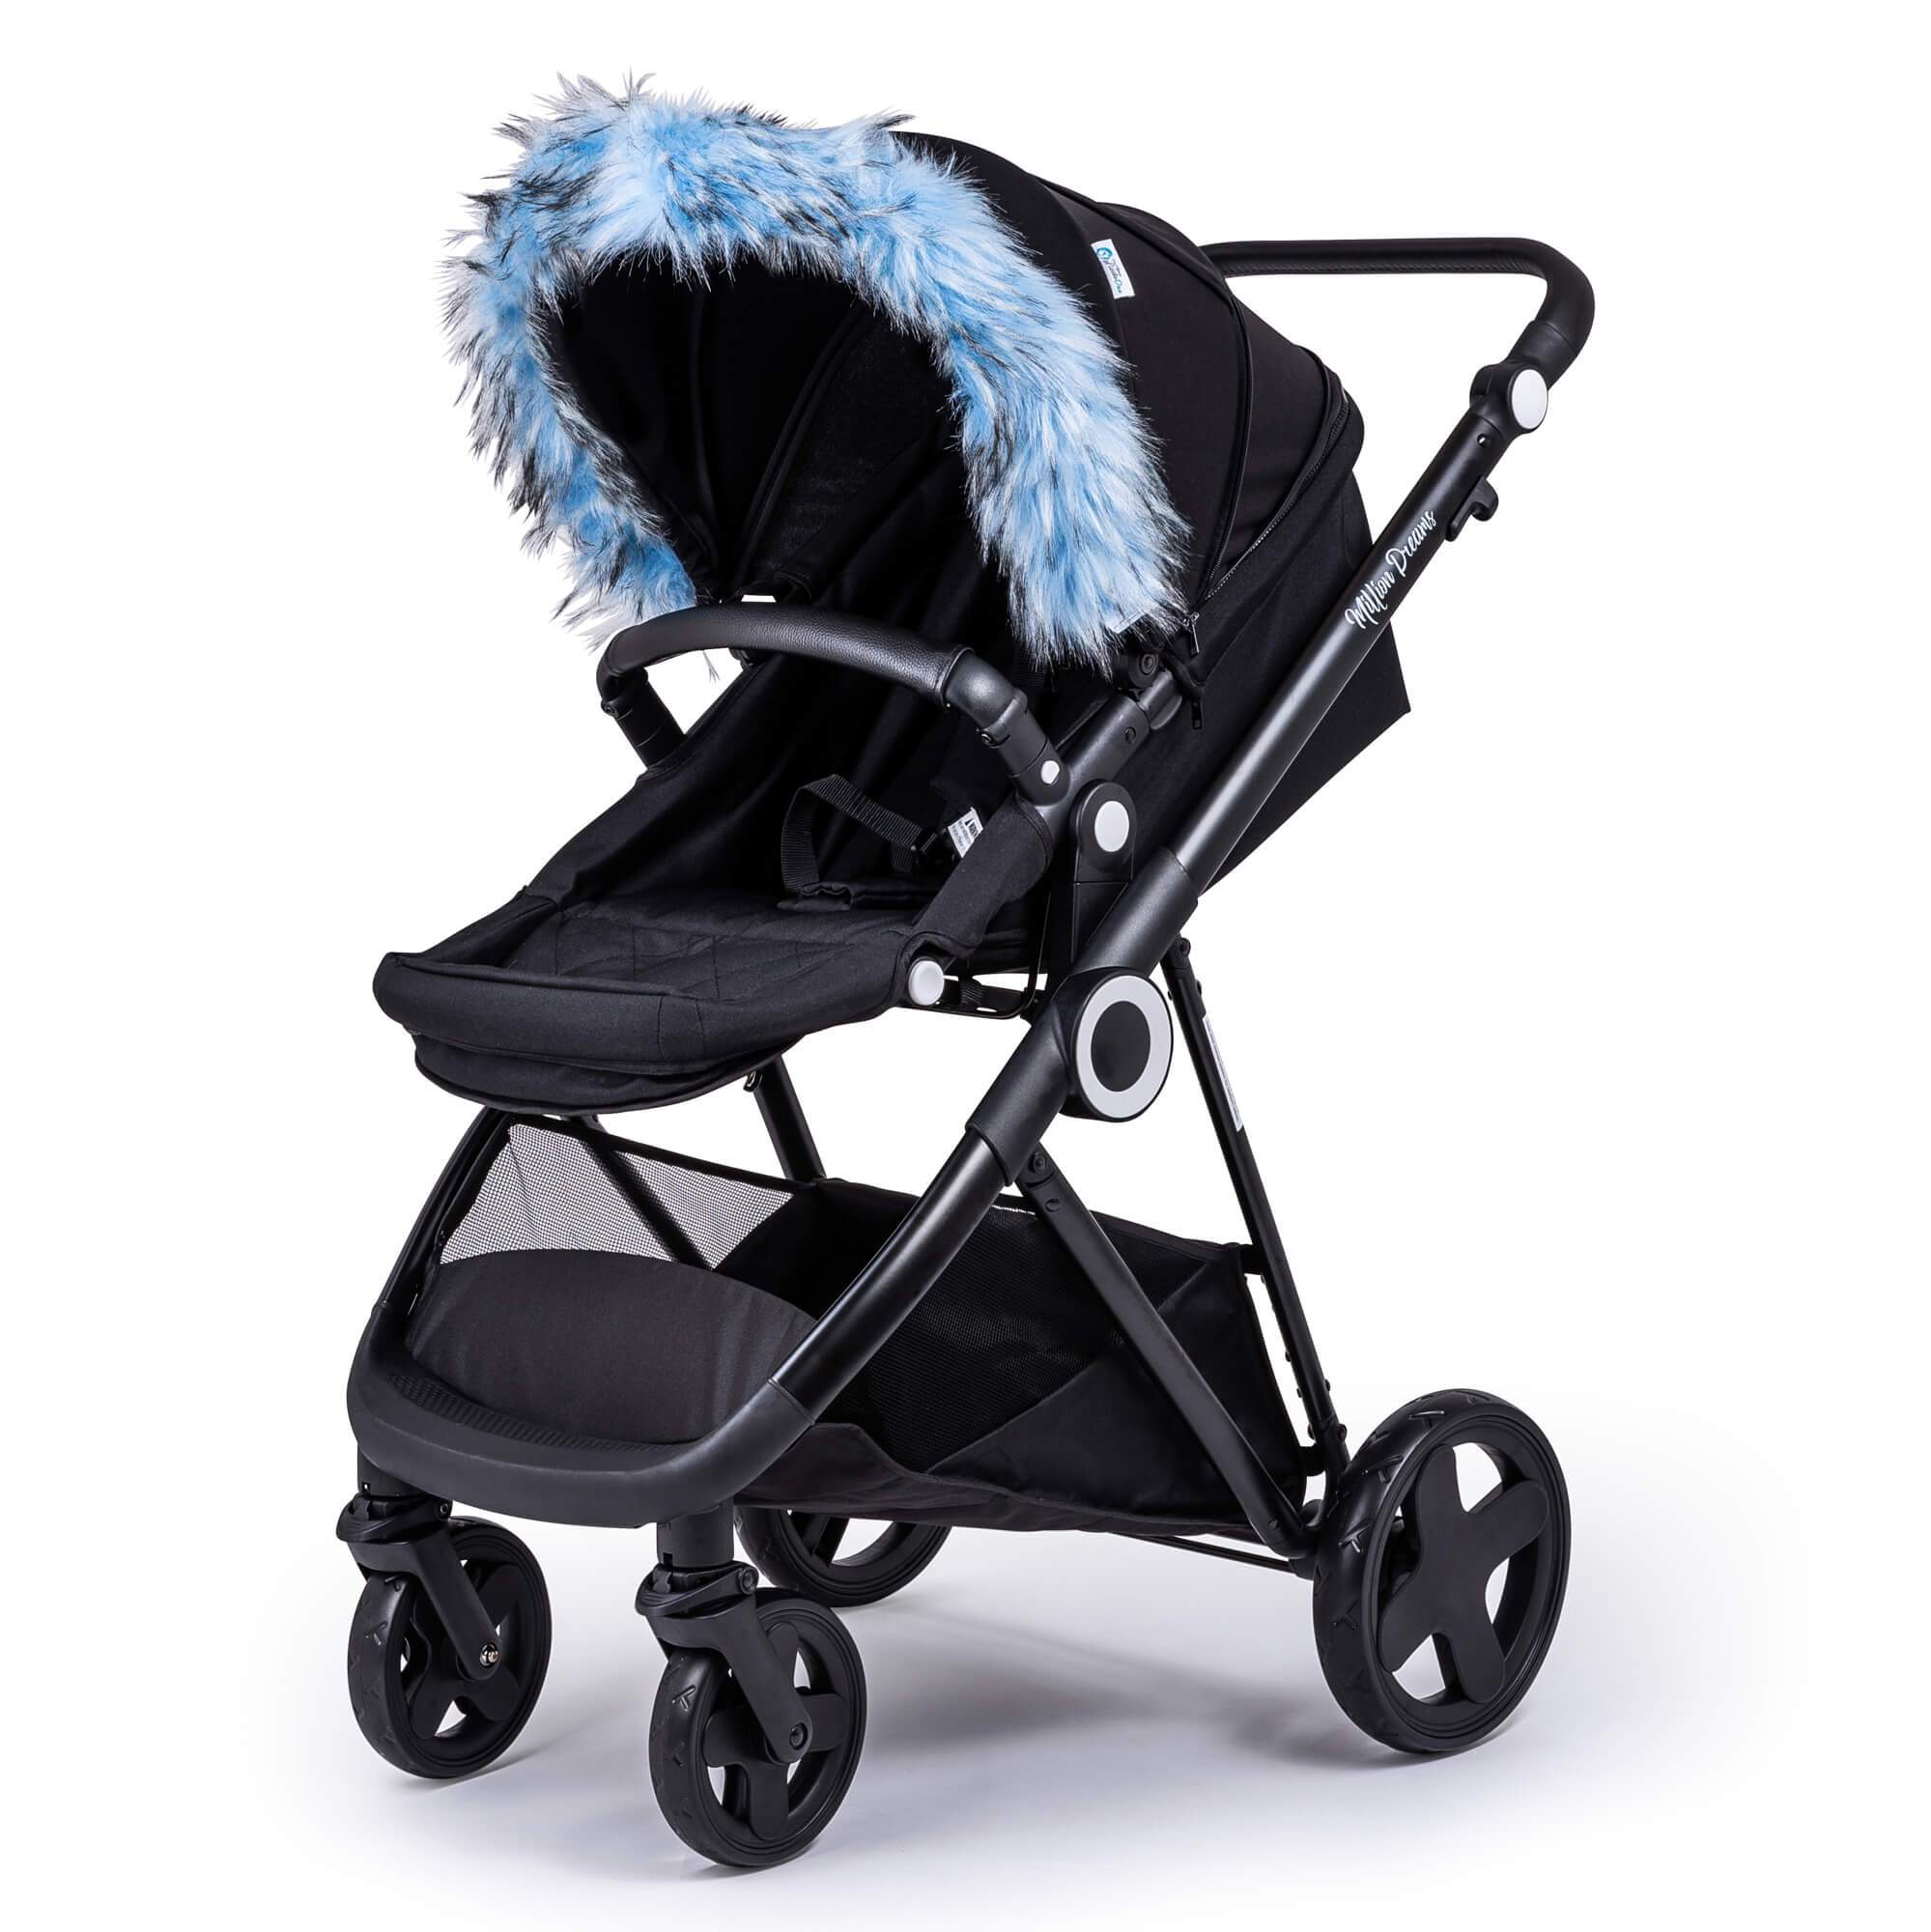 Pram Fur Hood Trim Attachment for Pushchair Compatible with BabiesRus - Light Blue / Fits All Models | For Your Little One